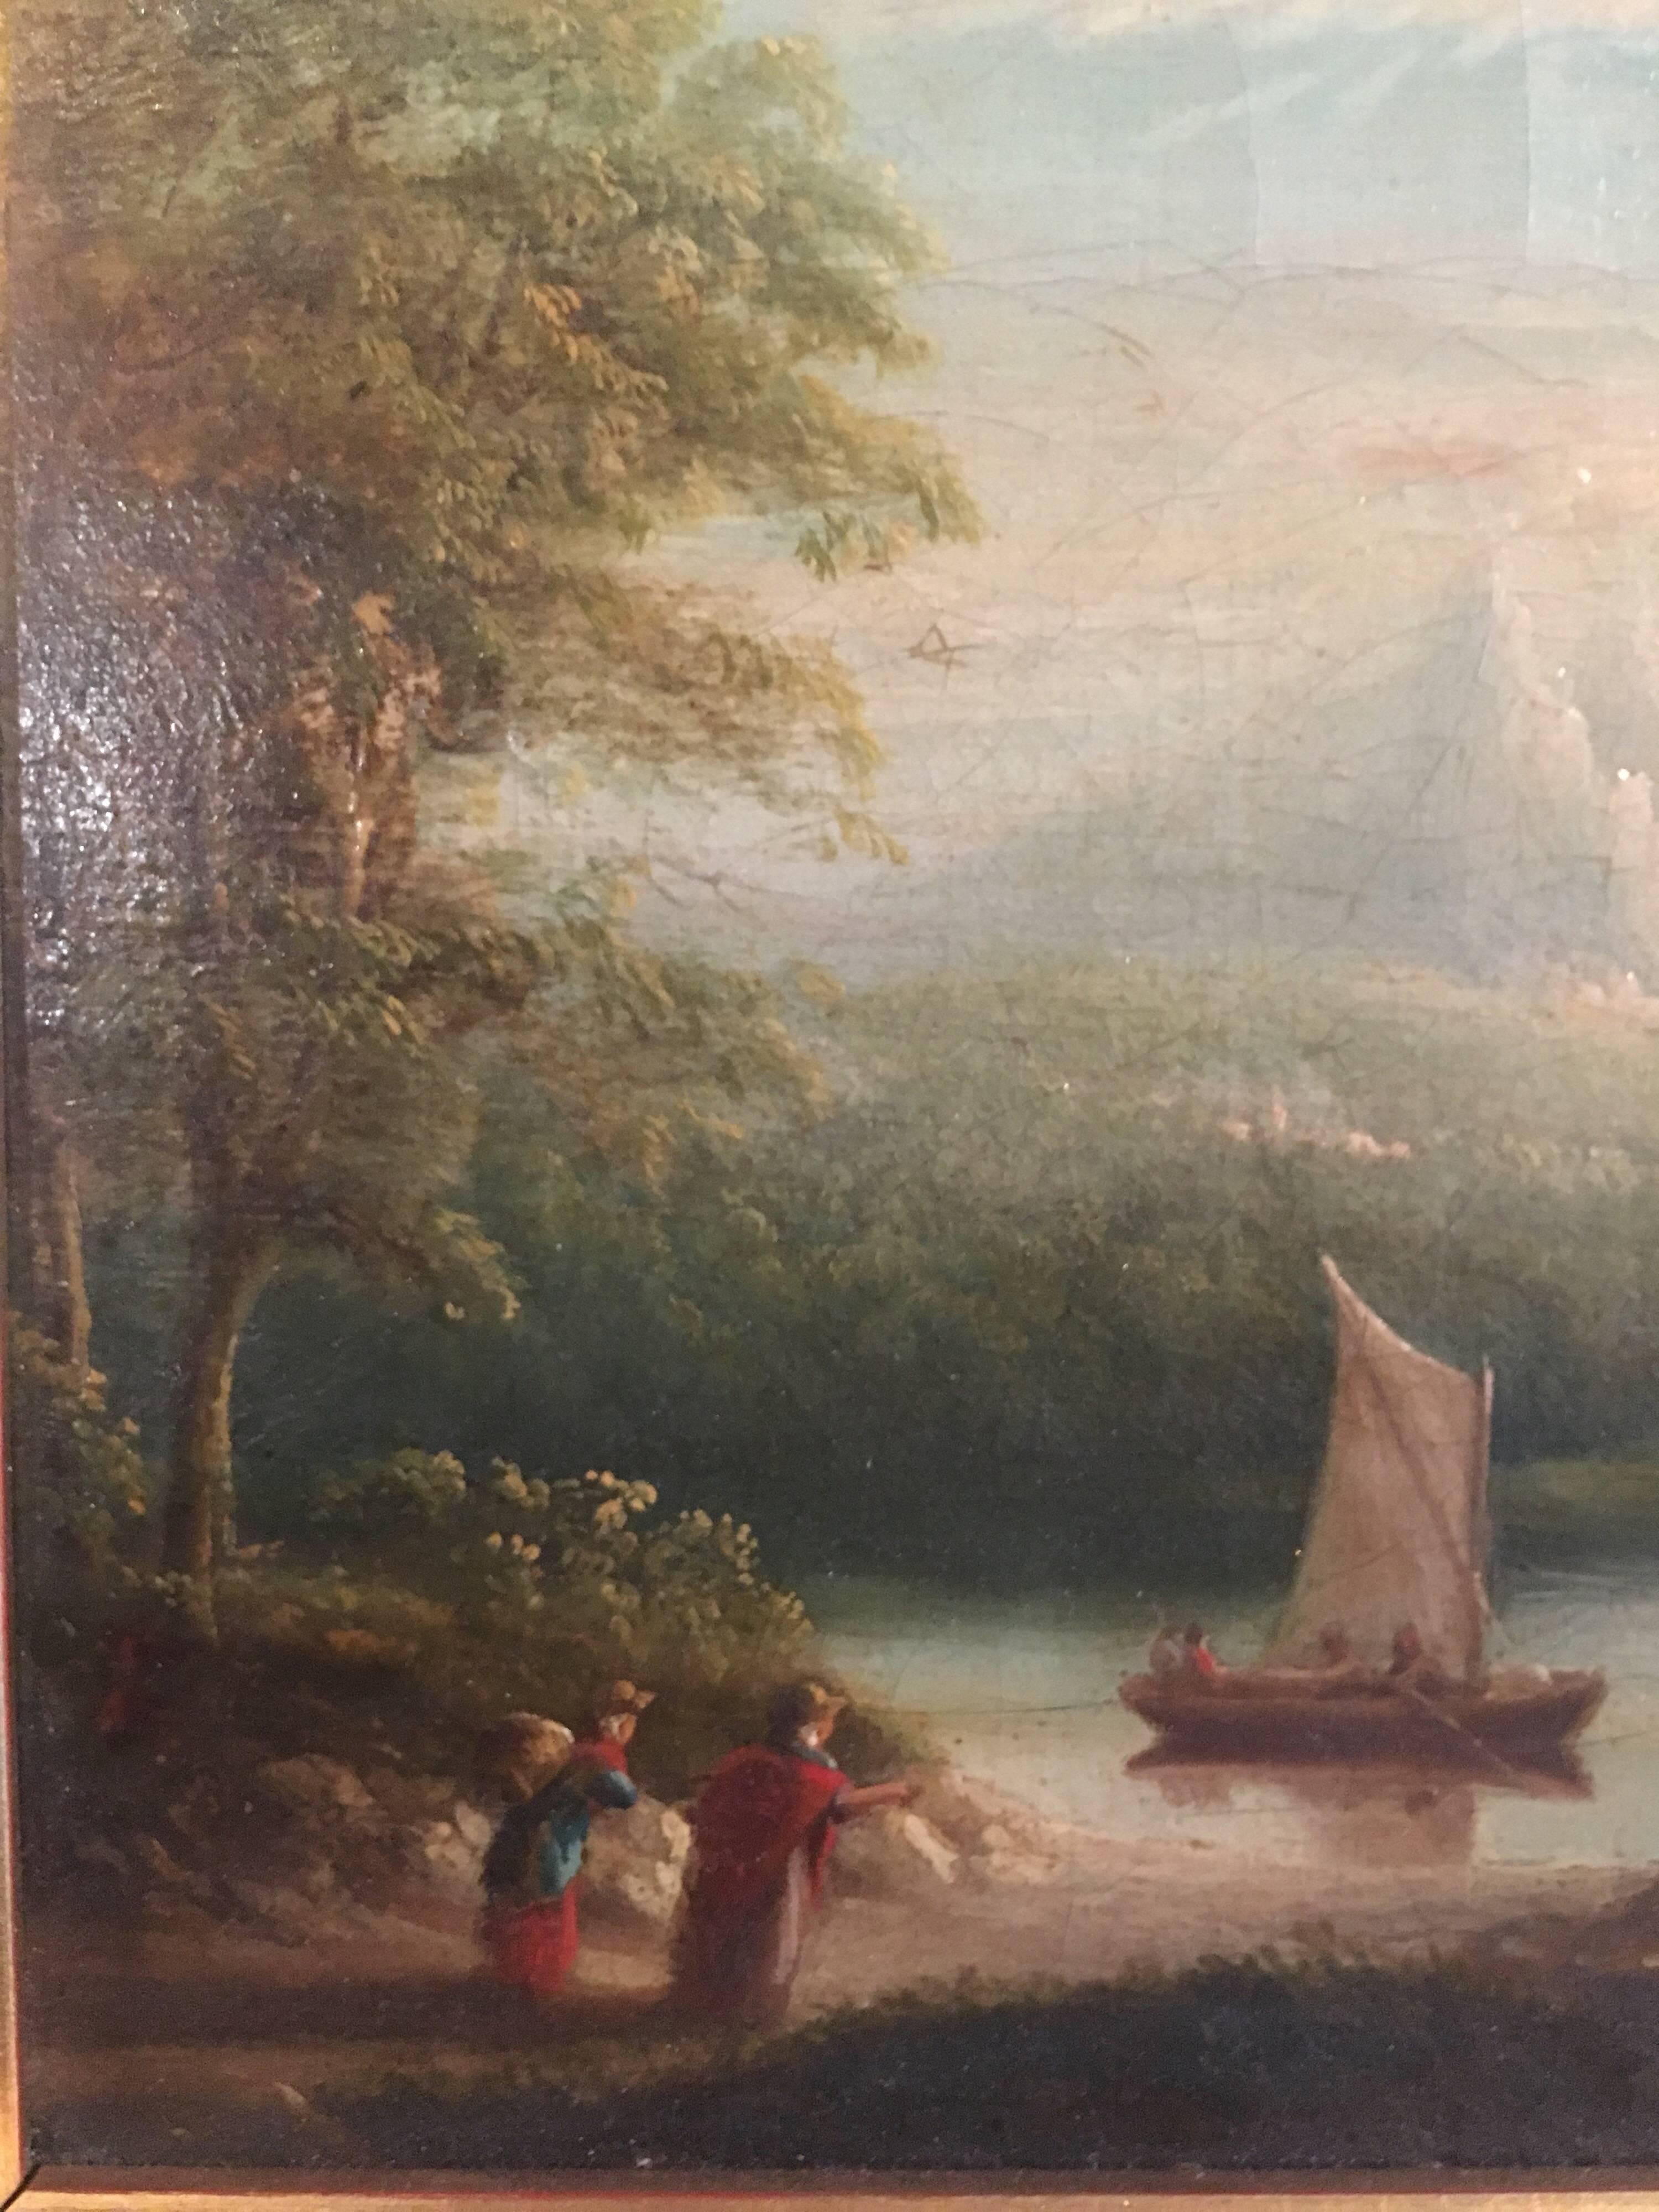 Travellers in Arcadian Landscape
British School, early 19th century
Oil painting on canvas, framed
framed size: 9.5 x 11.5 inches

